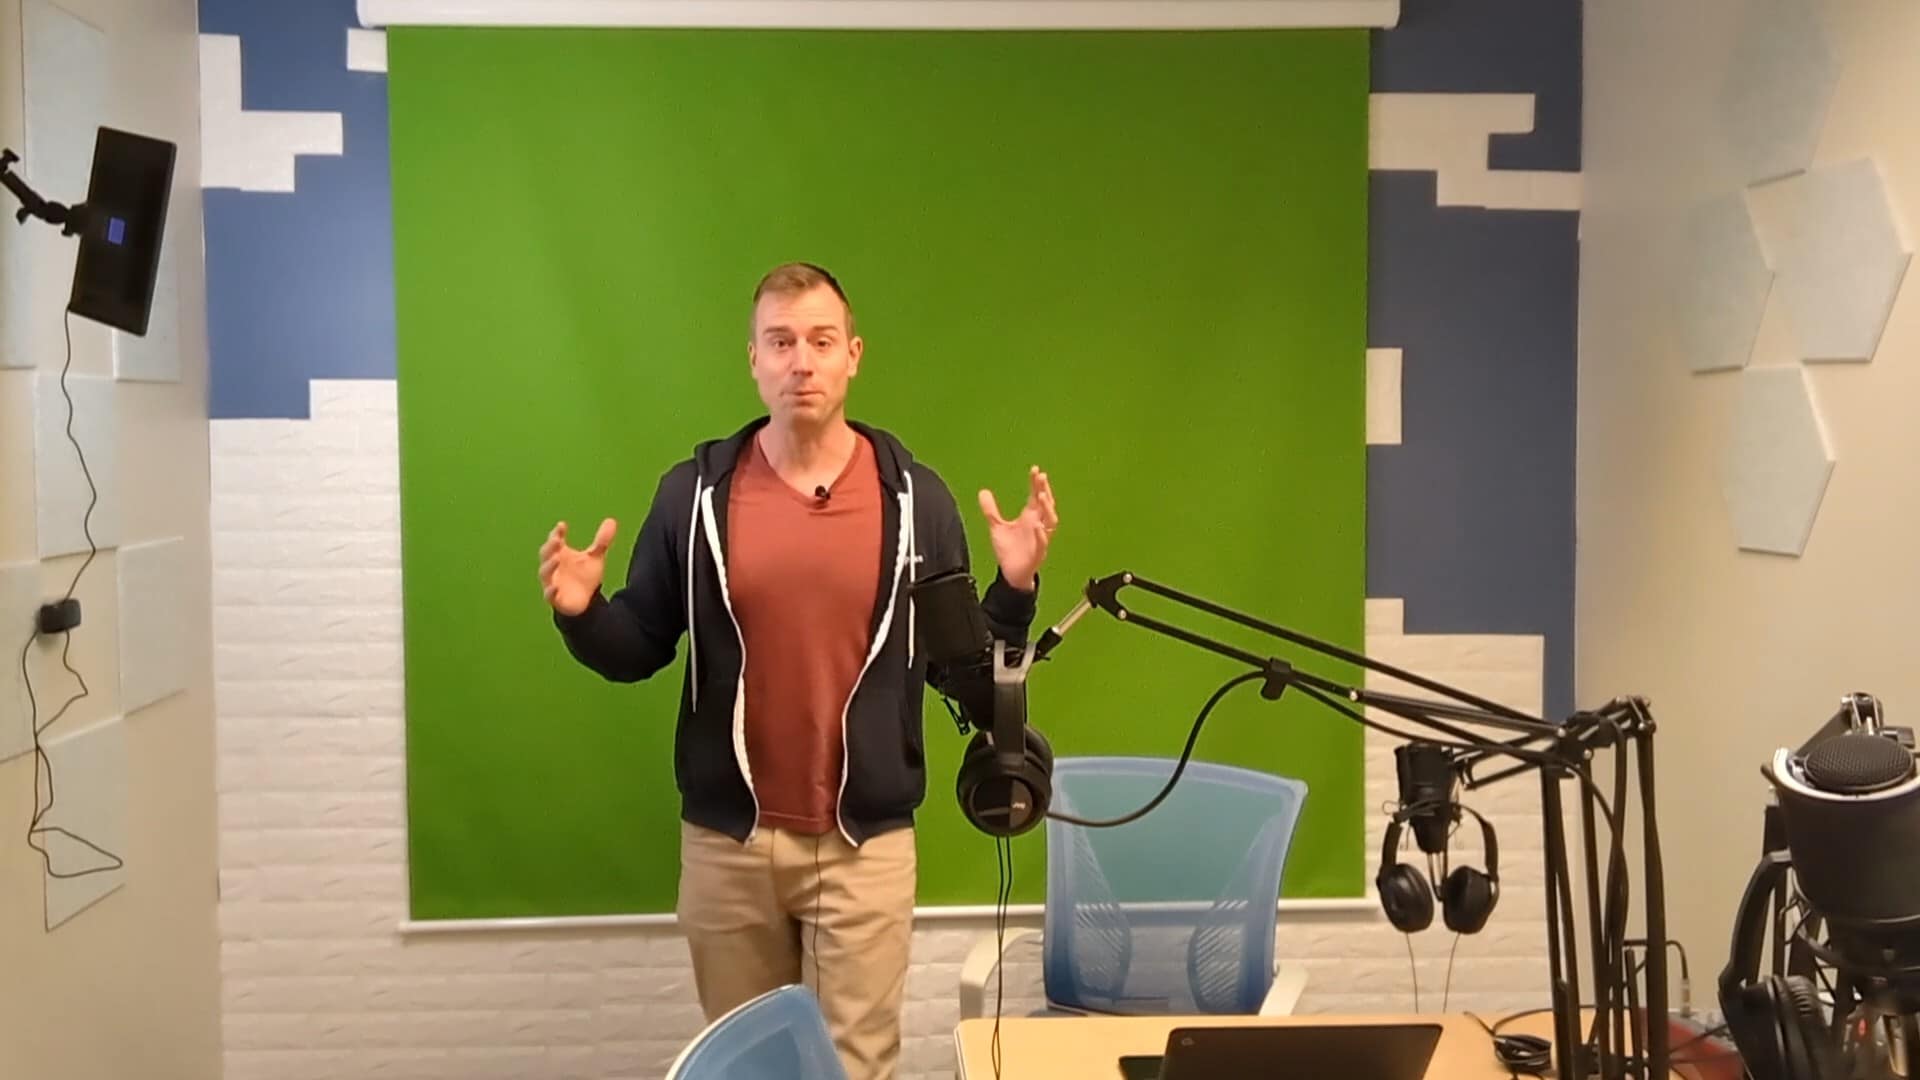 Craig in front of the green screen at Creative Density Coworking in Denver